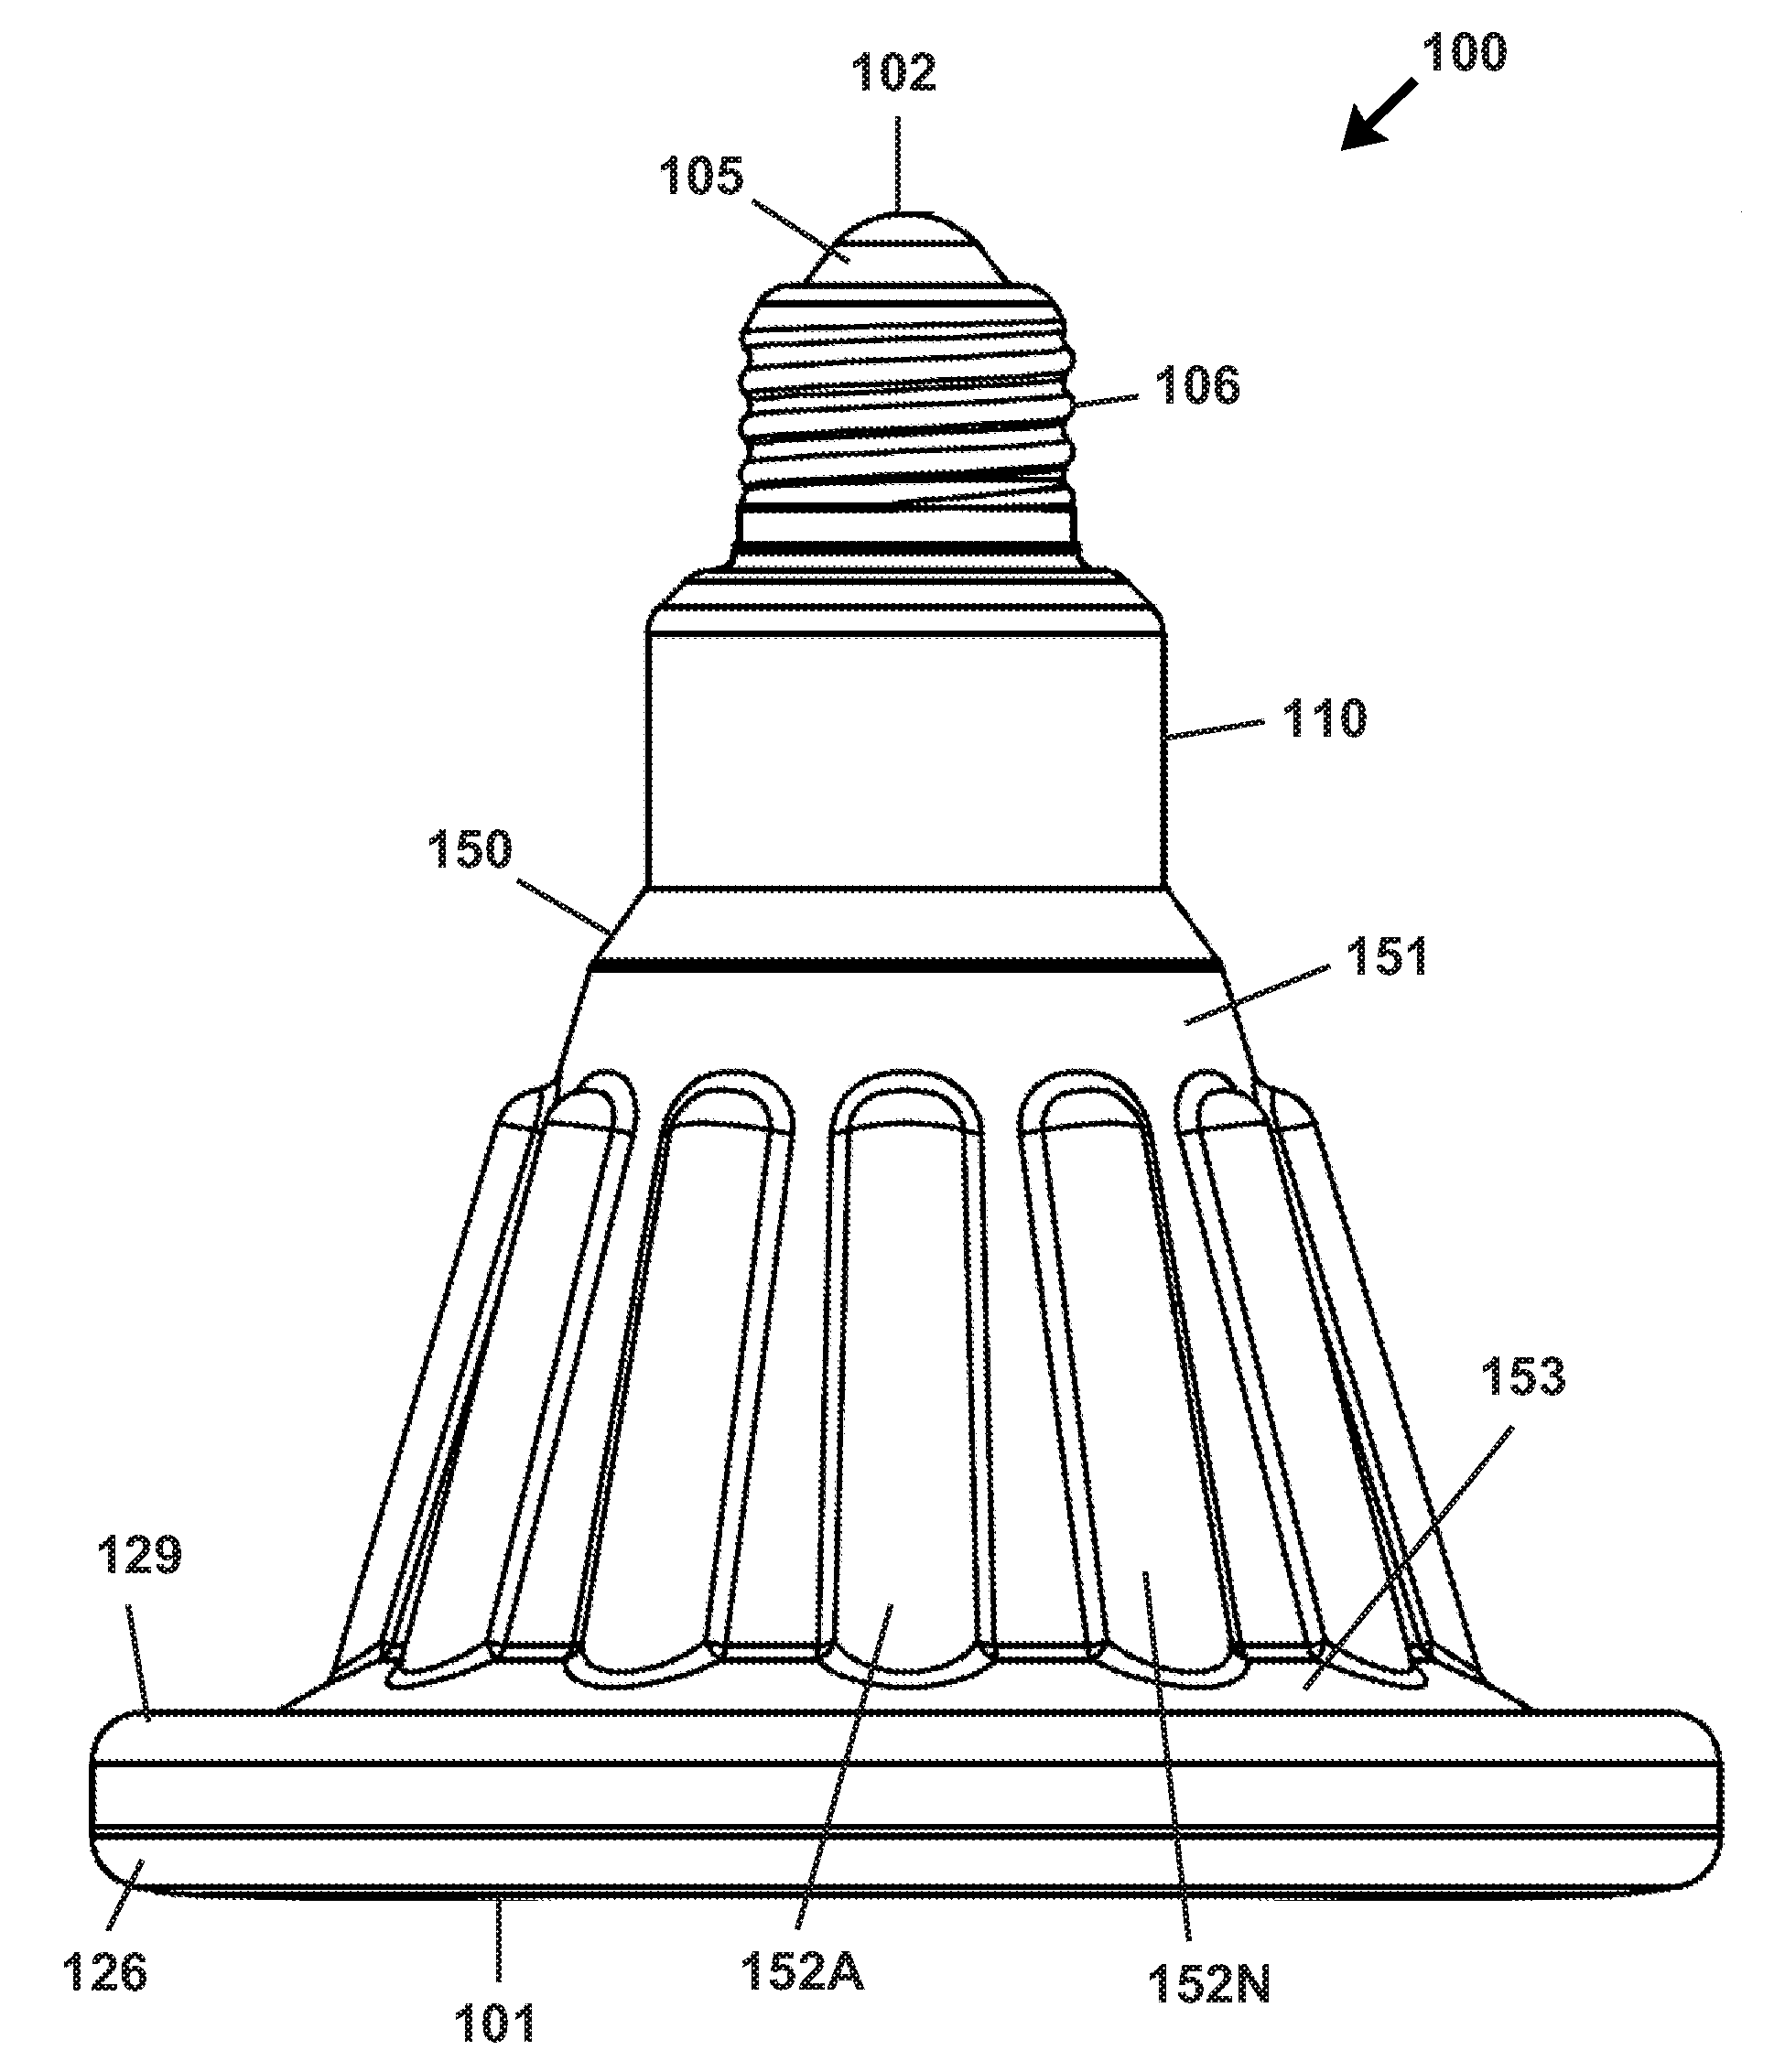 Solid state lighting device with improved heatsink